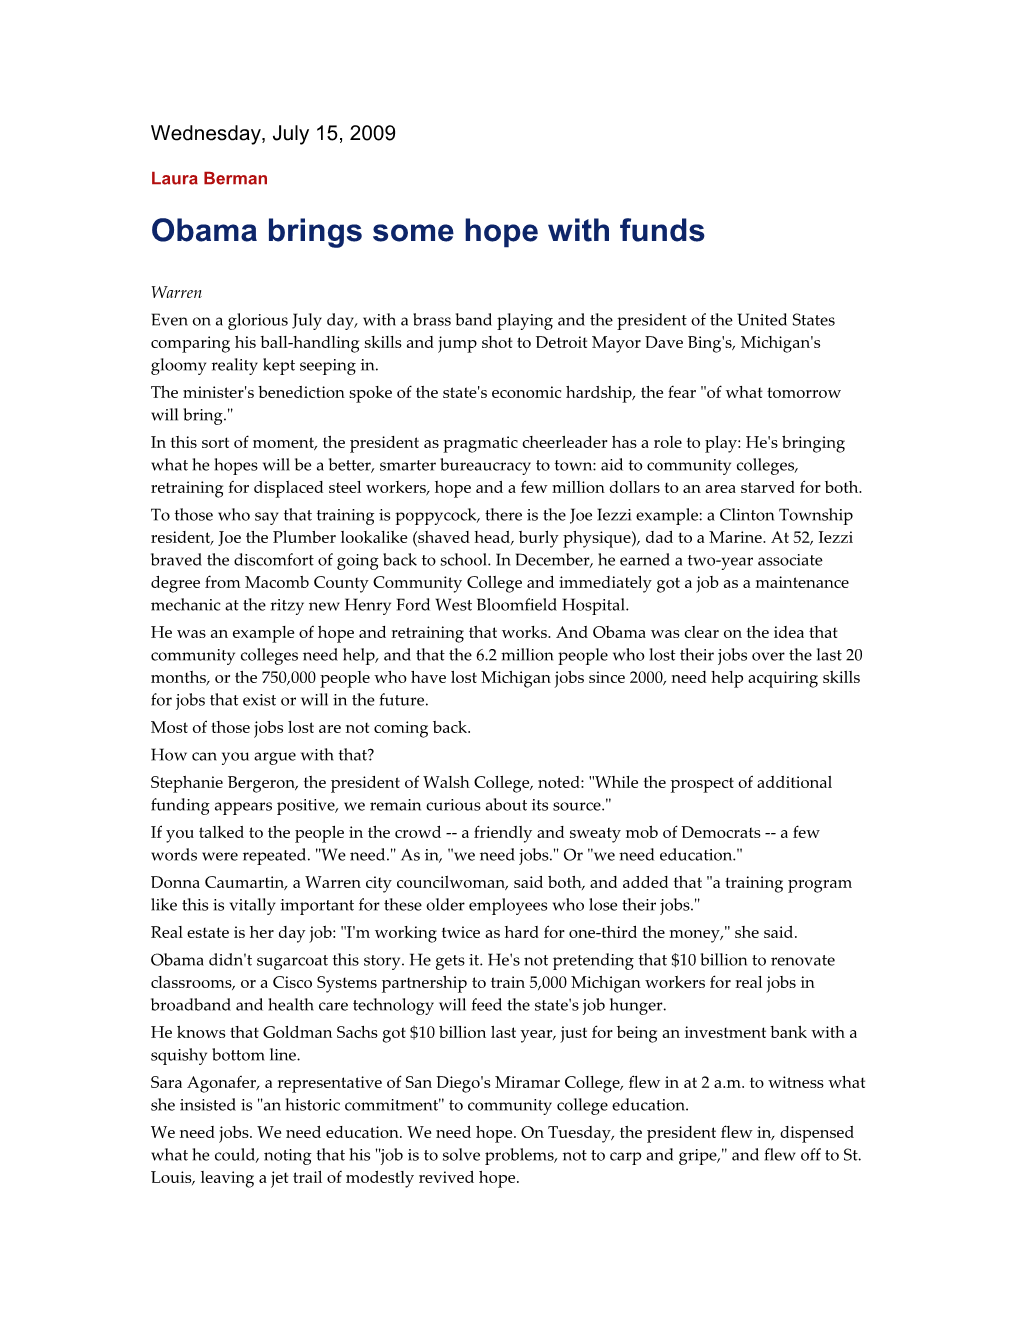 Obama Brings Some Hope with Funds